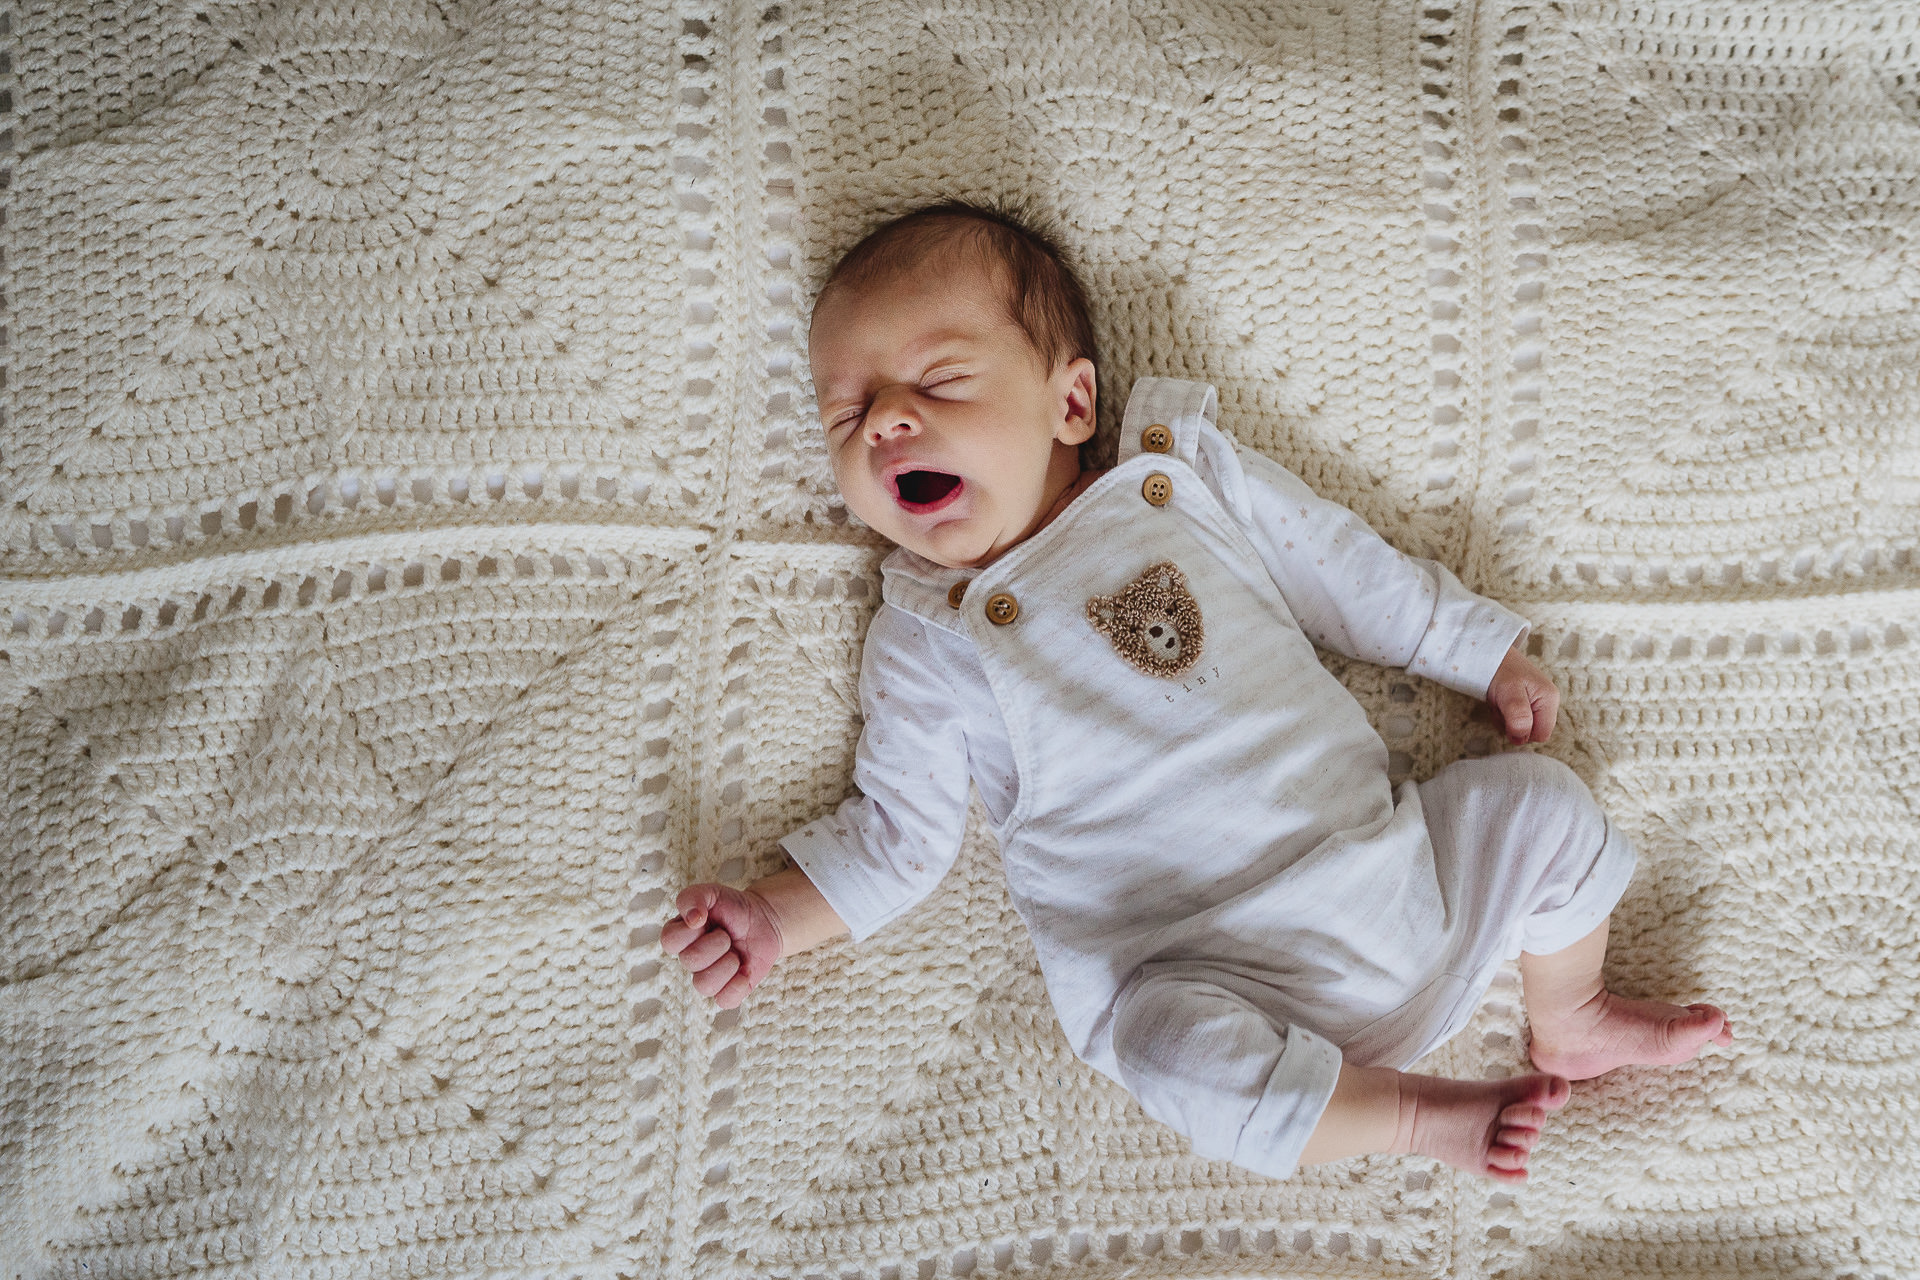 A baby yawning on a blanket